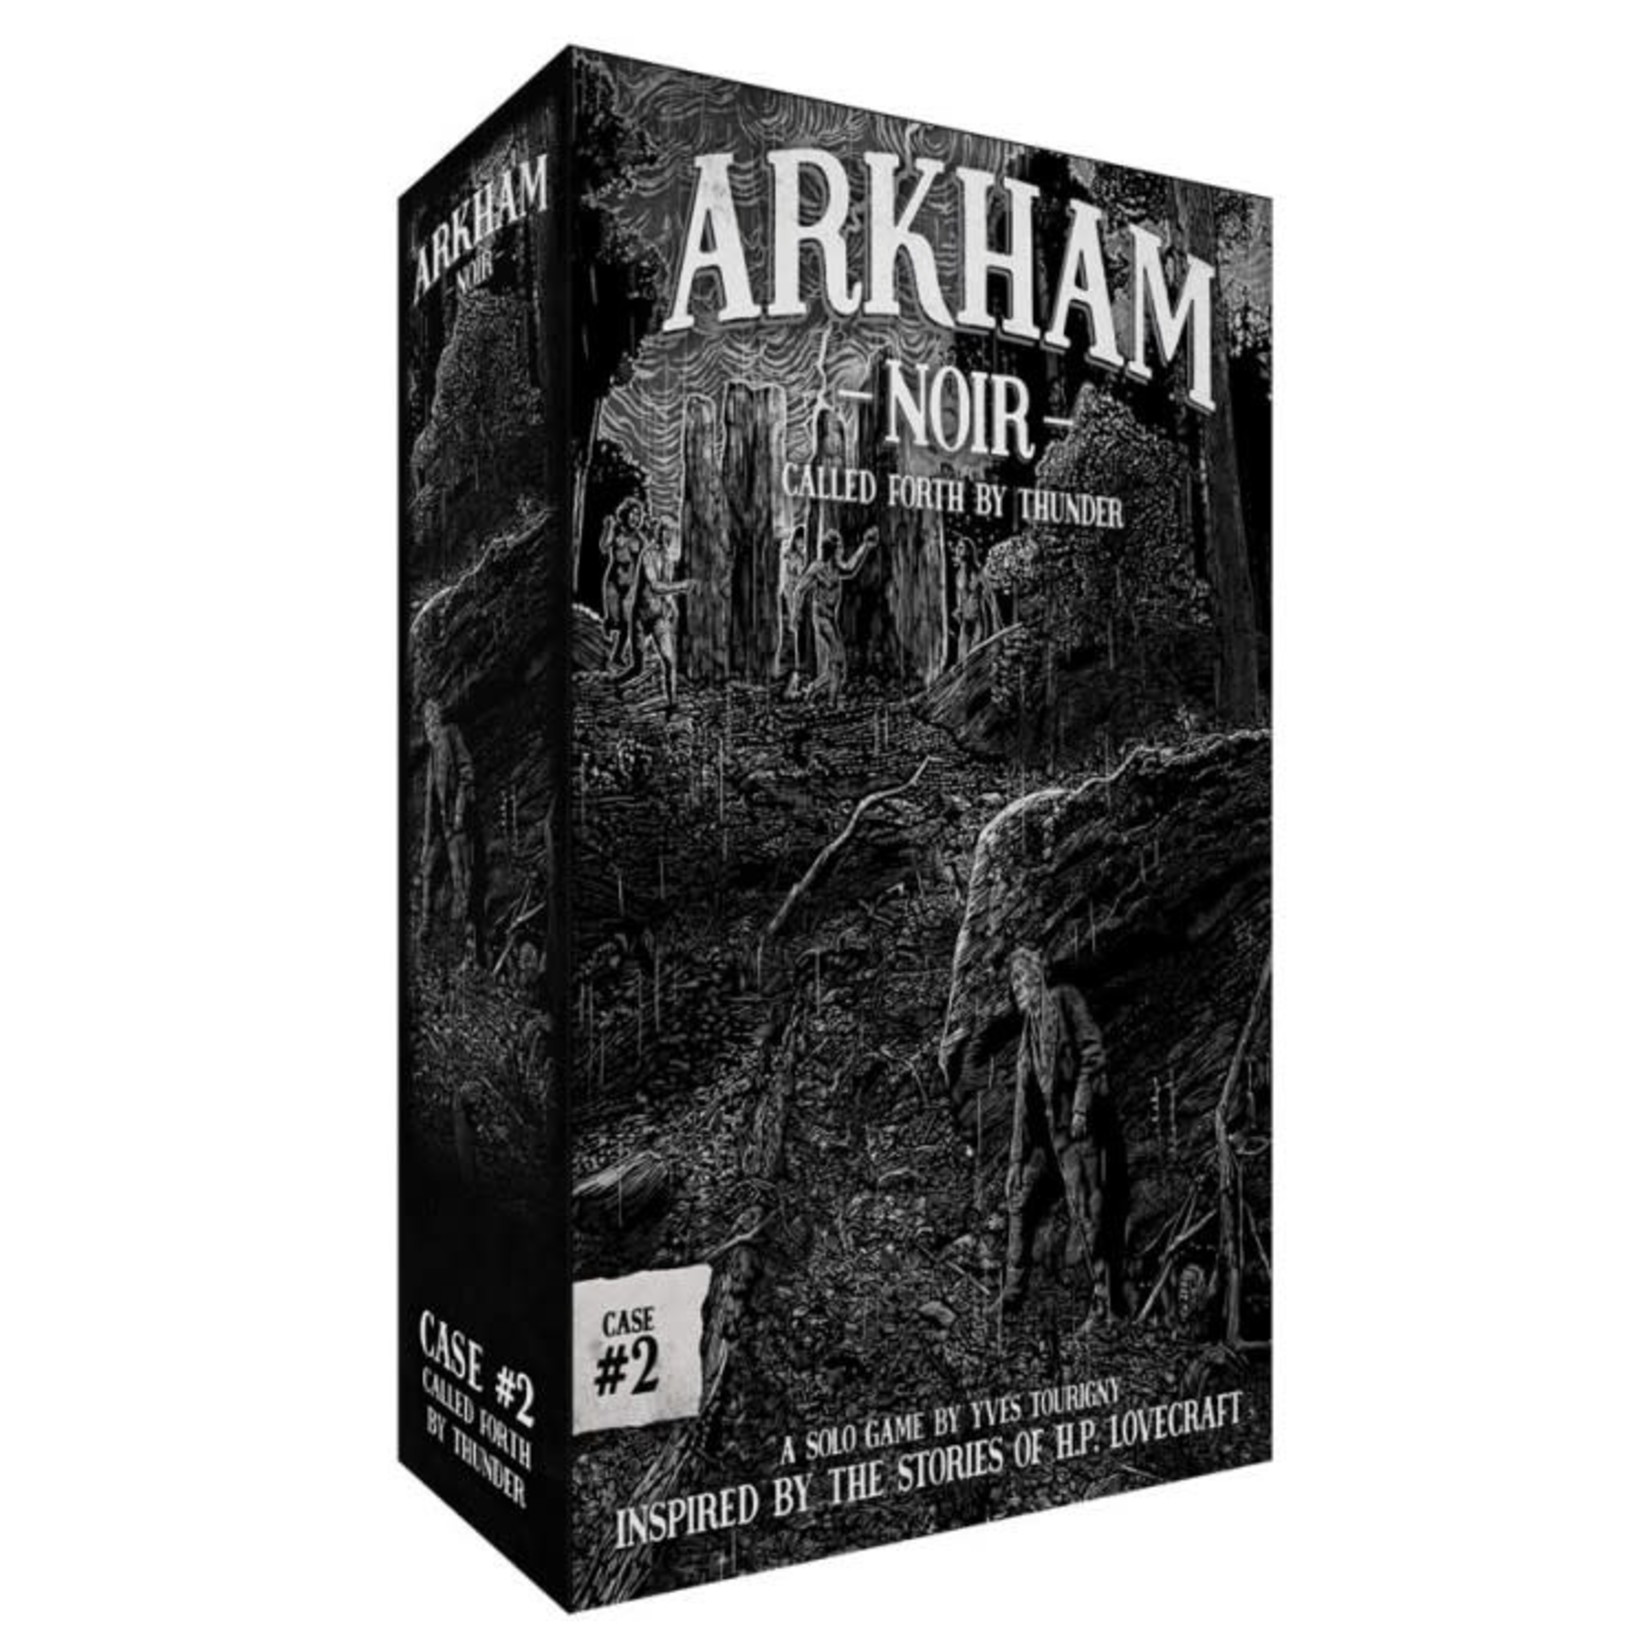 Asmodee Editions Arkham Noir: Case #2 - Call Forth by Thunder